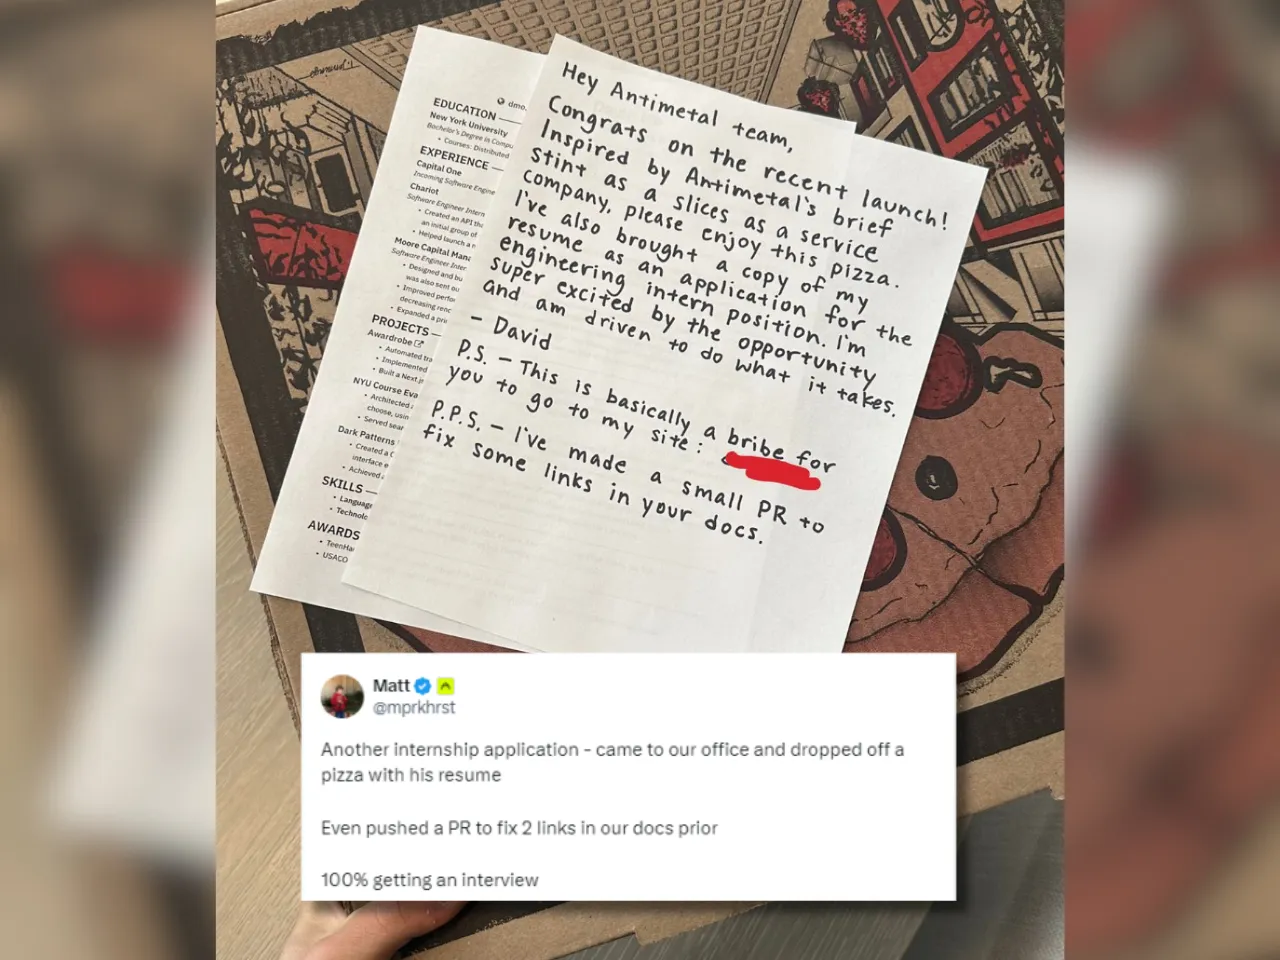 'This is basically a bribe': Man looking for internship delivers Pizza along with CV, CEO reacts...